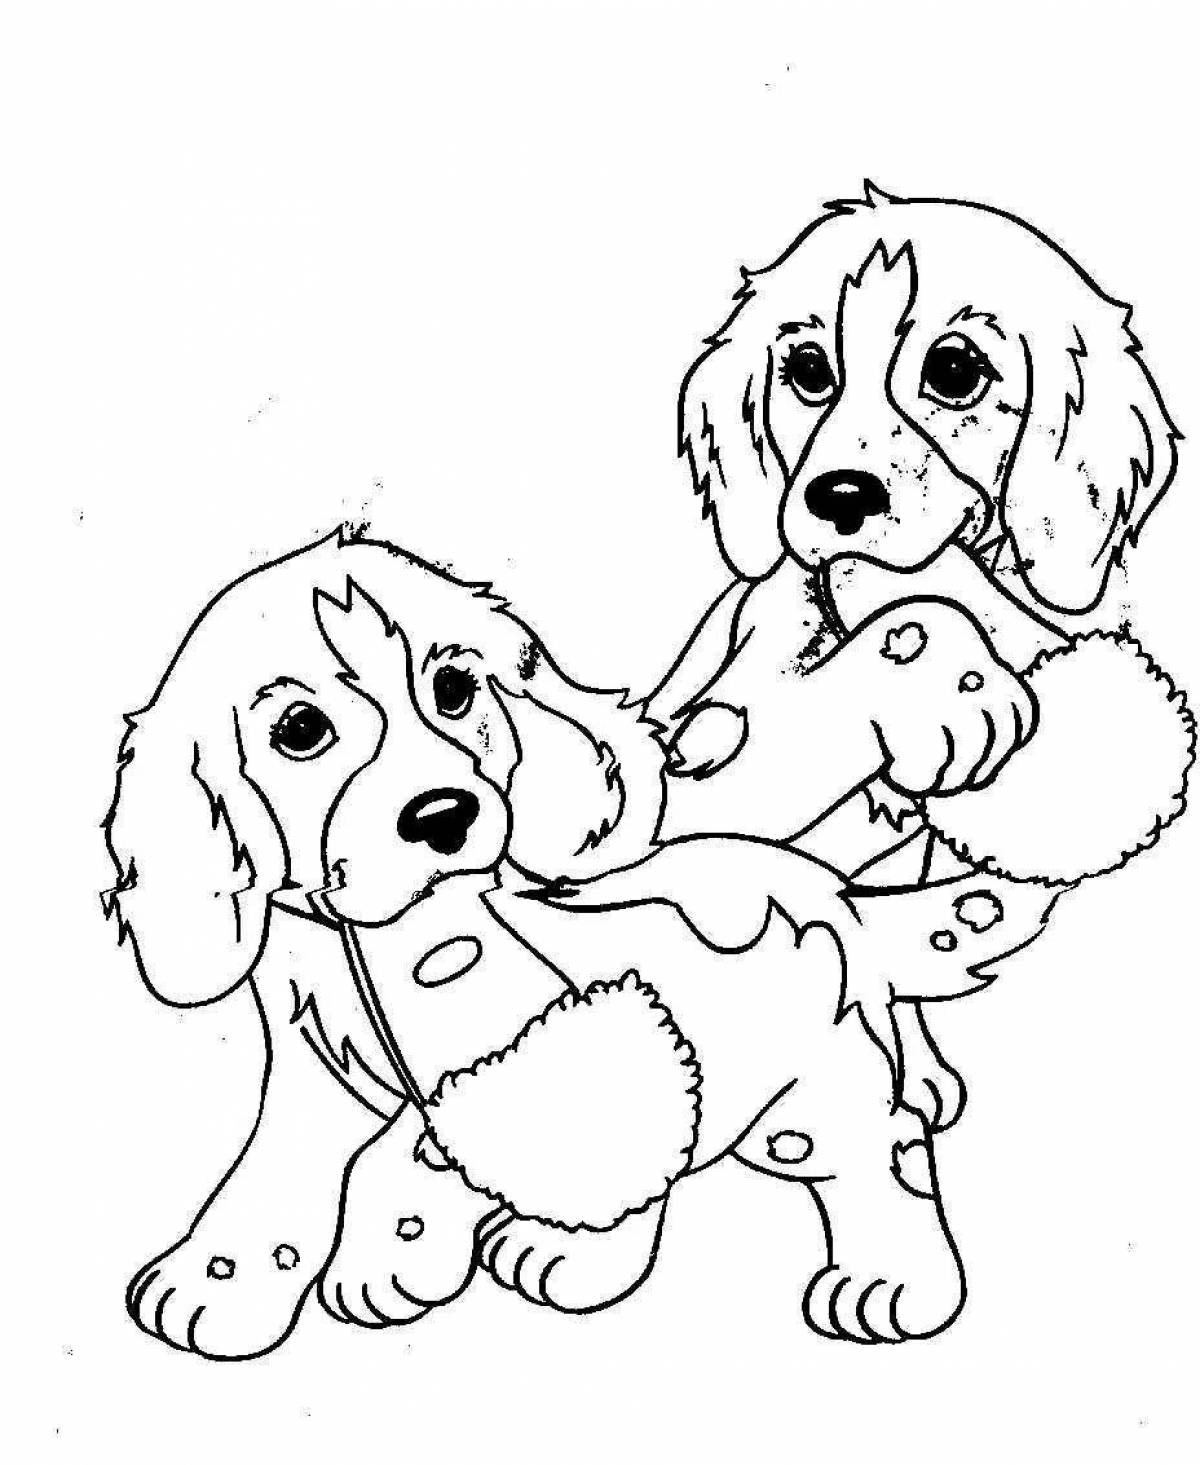 Affectionate dog coloring book for children 5-6 years old